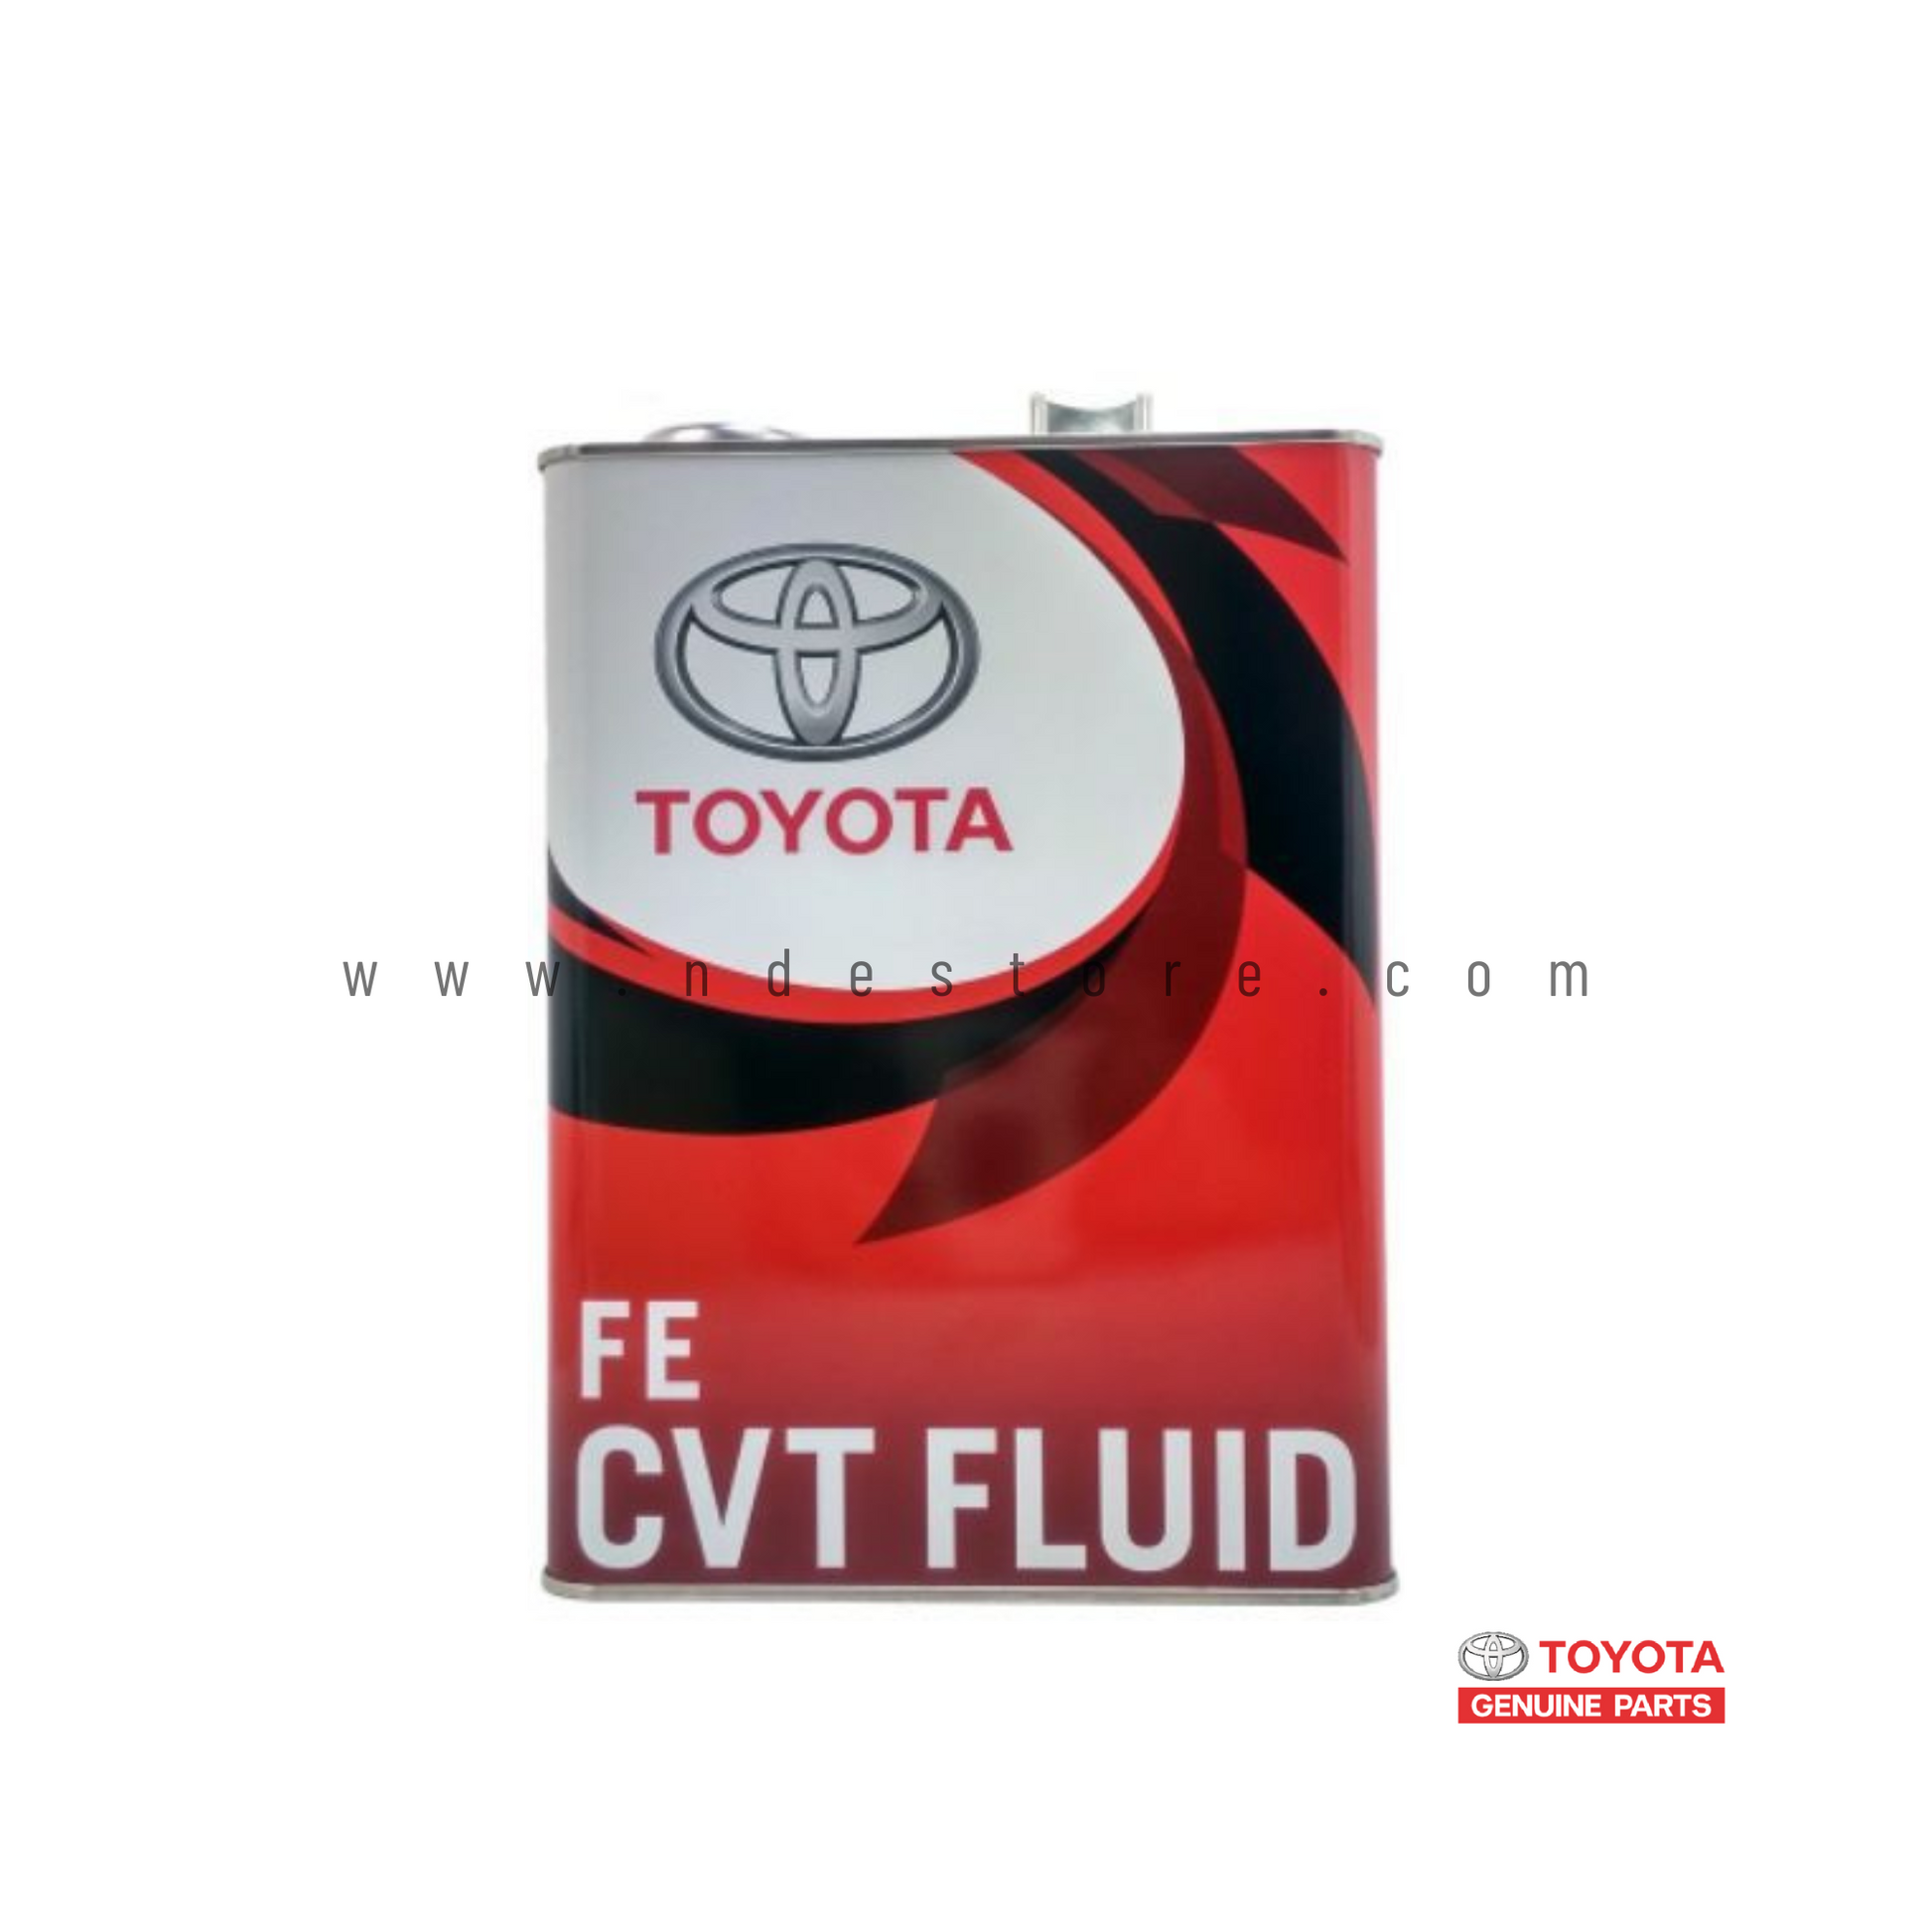 TRANSMISSION FLUID TOYOTA WS AT FLUID ATF TOYOTA GENUINE PARTS MADE IN JAPAN WWW.NDESTORE.COM PAKISTAN GEAR OIL